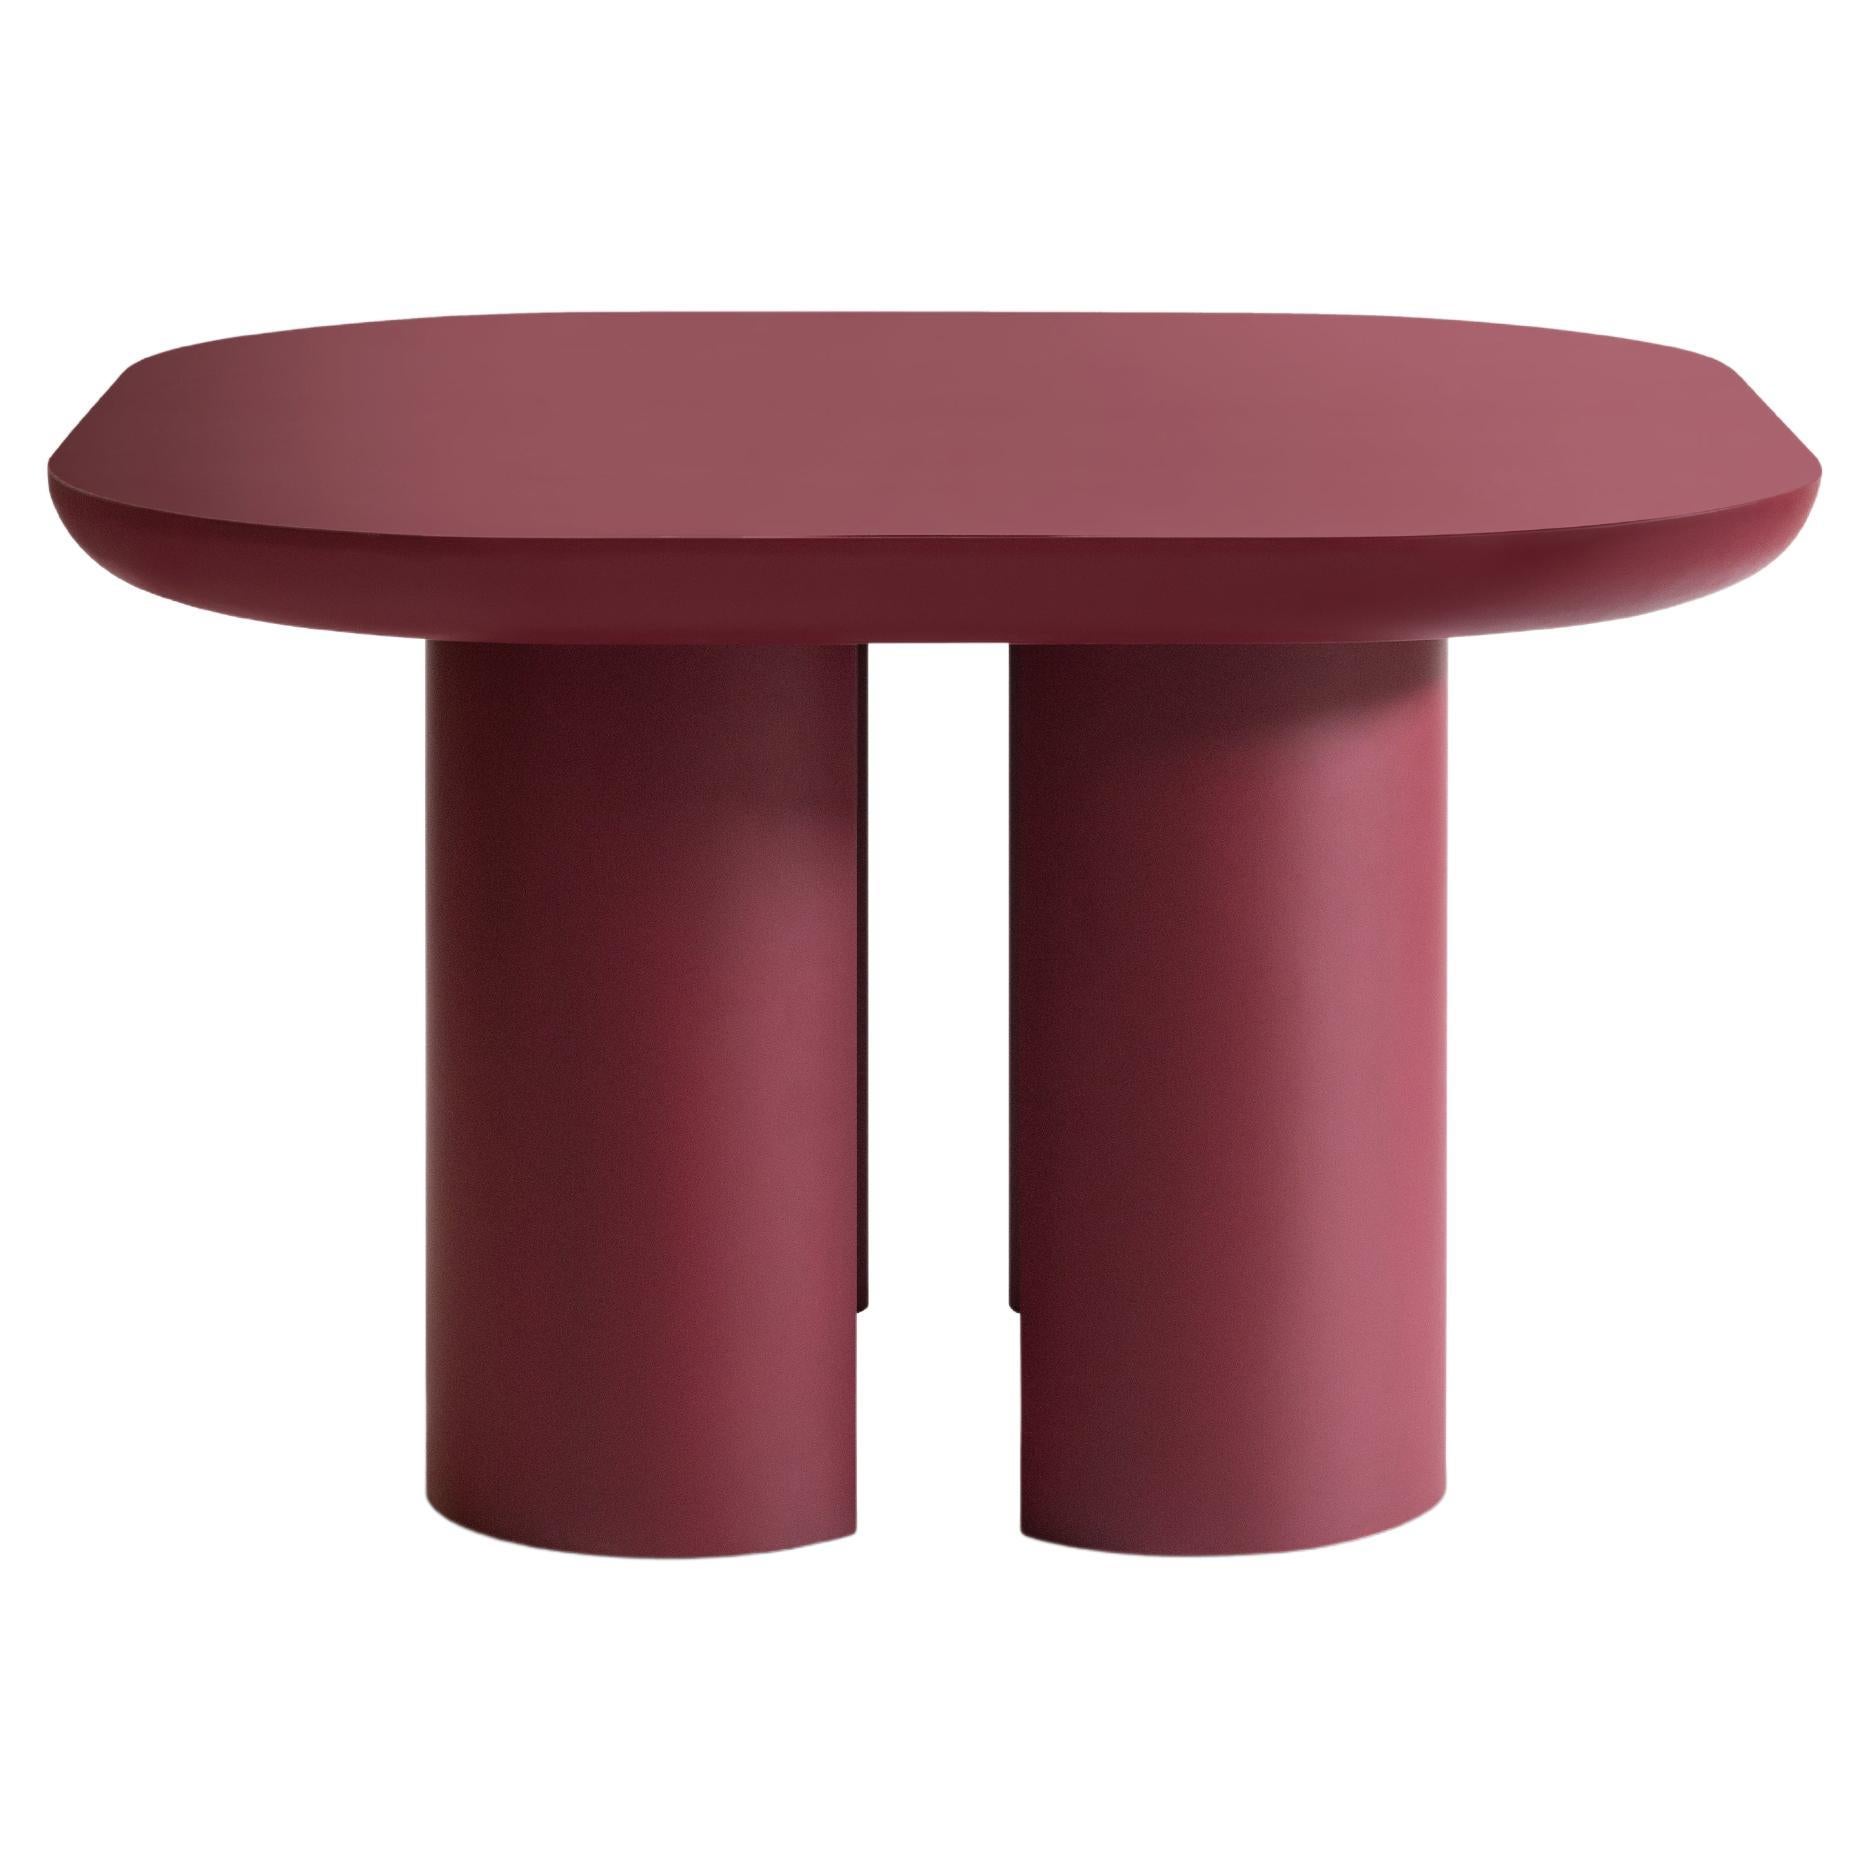 Contemporary Dining, Living Room Table Frattinifrilli for Medulum Wood Lacquered For Sale